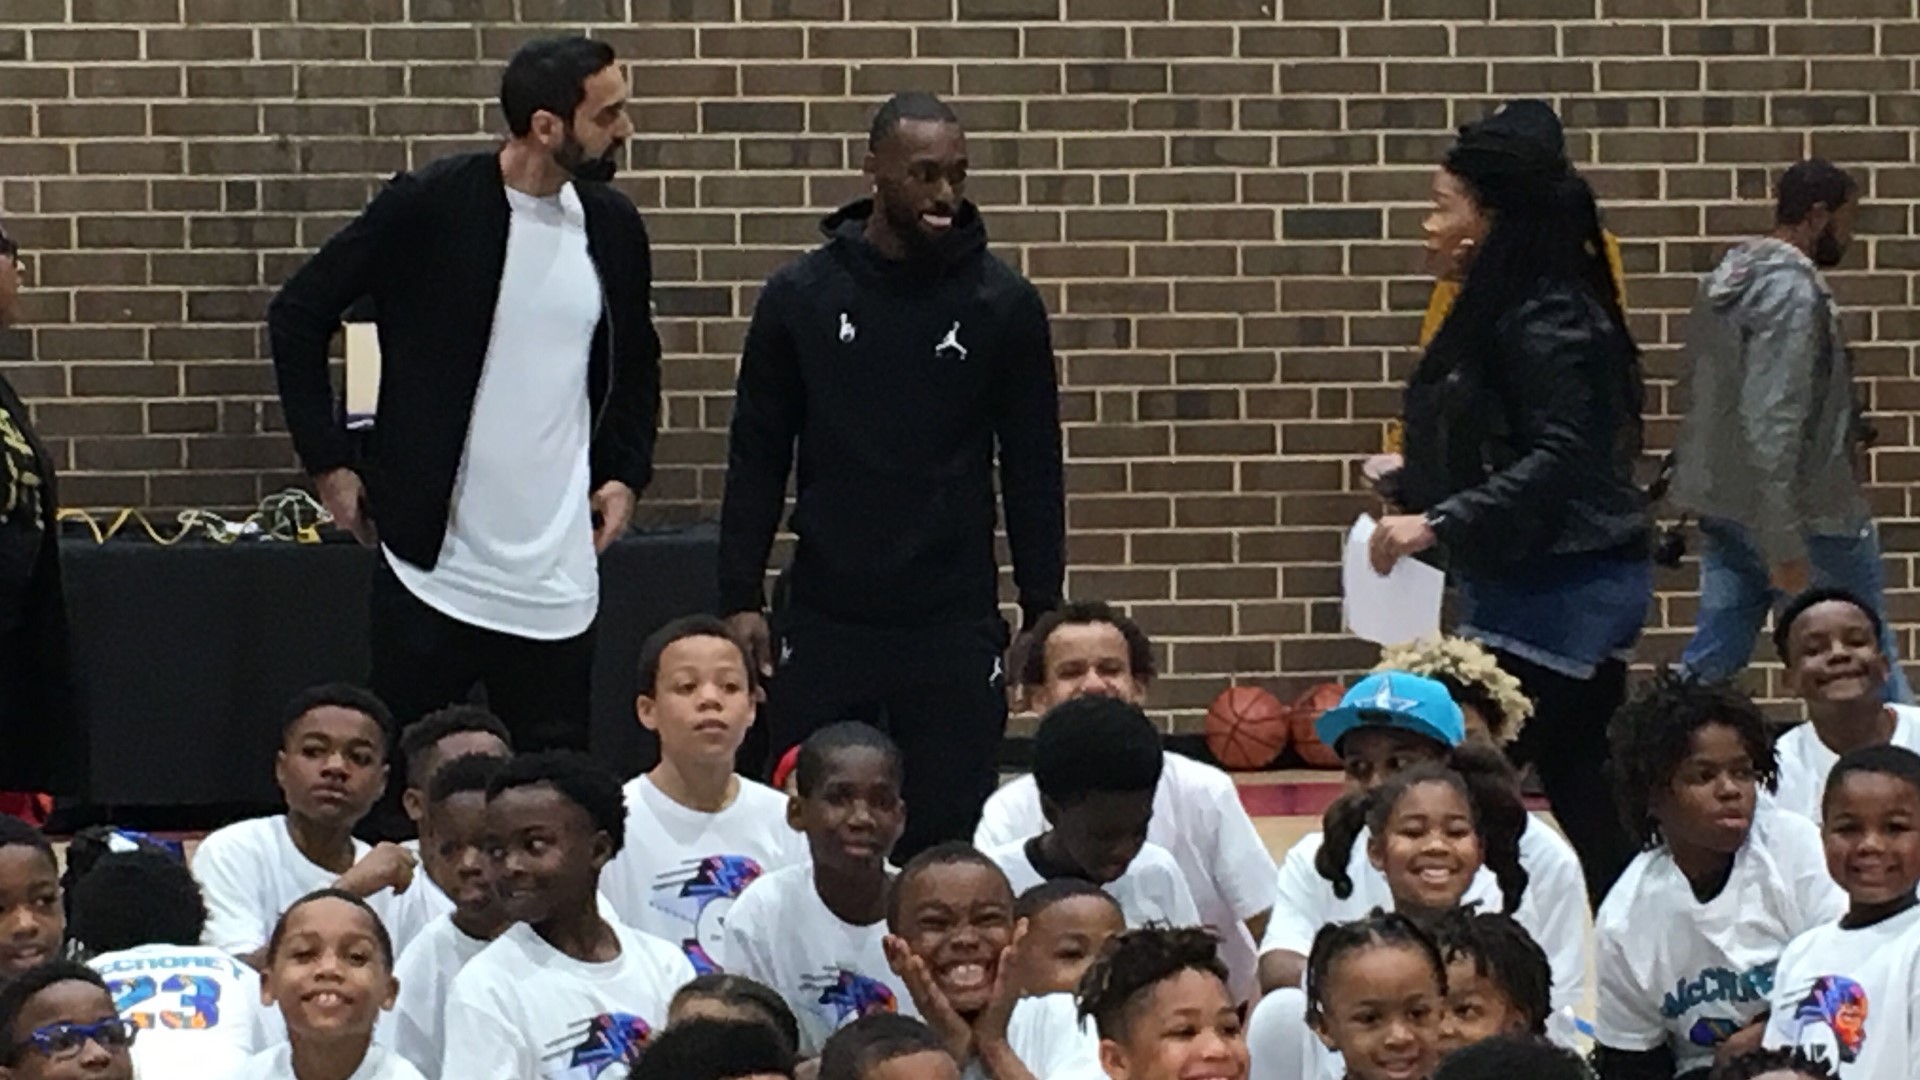 On Saturday, Kemba Walker and NBA 2K unveiled their latest basketball facility makeover at McCrorey YMCA in Charlotte.